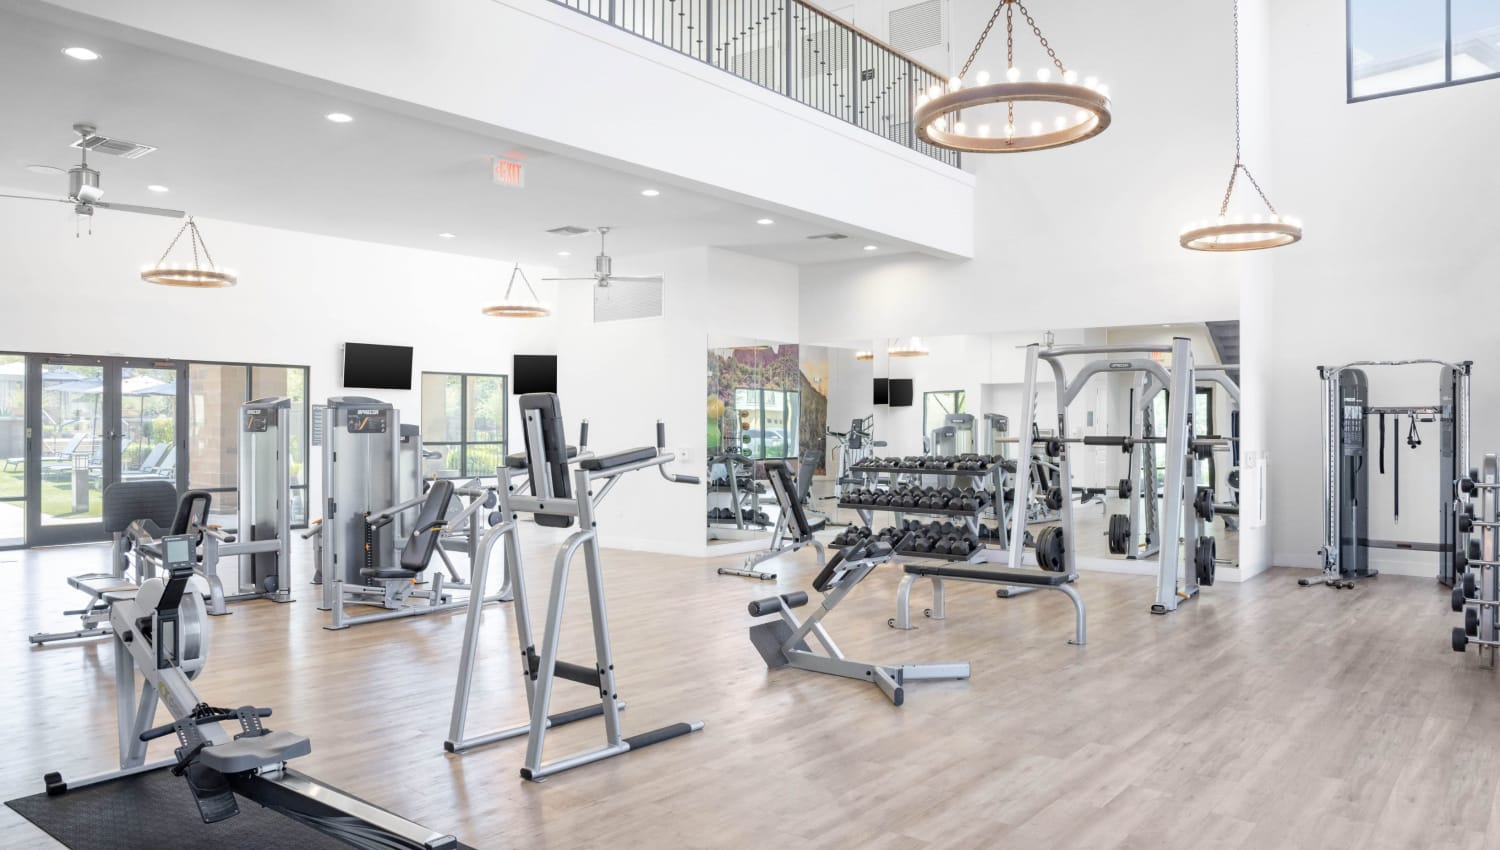 Well equipped fitness center at Cadia Crossing in Gilbert, Arizona